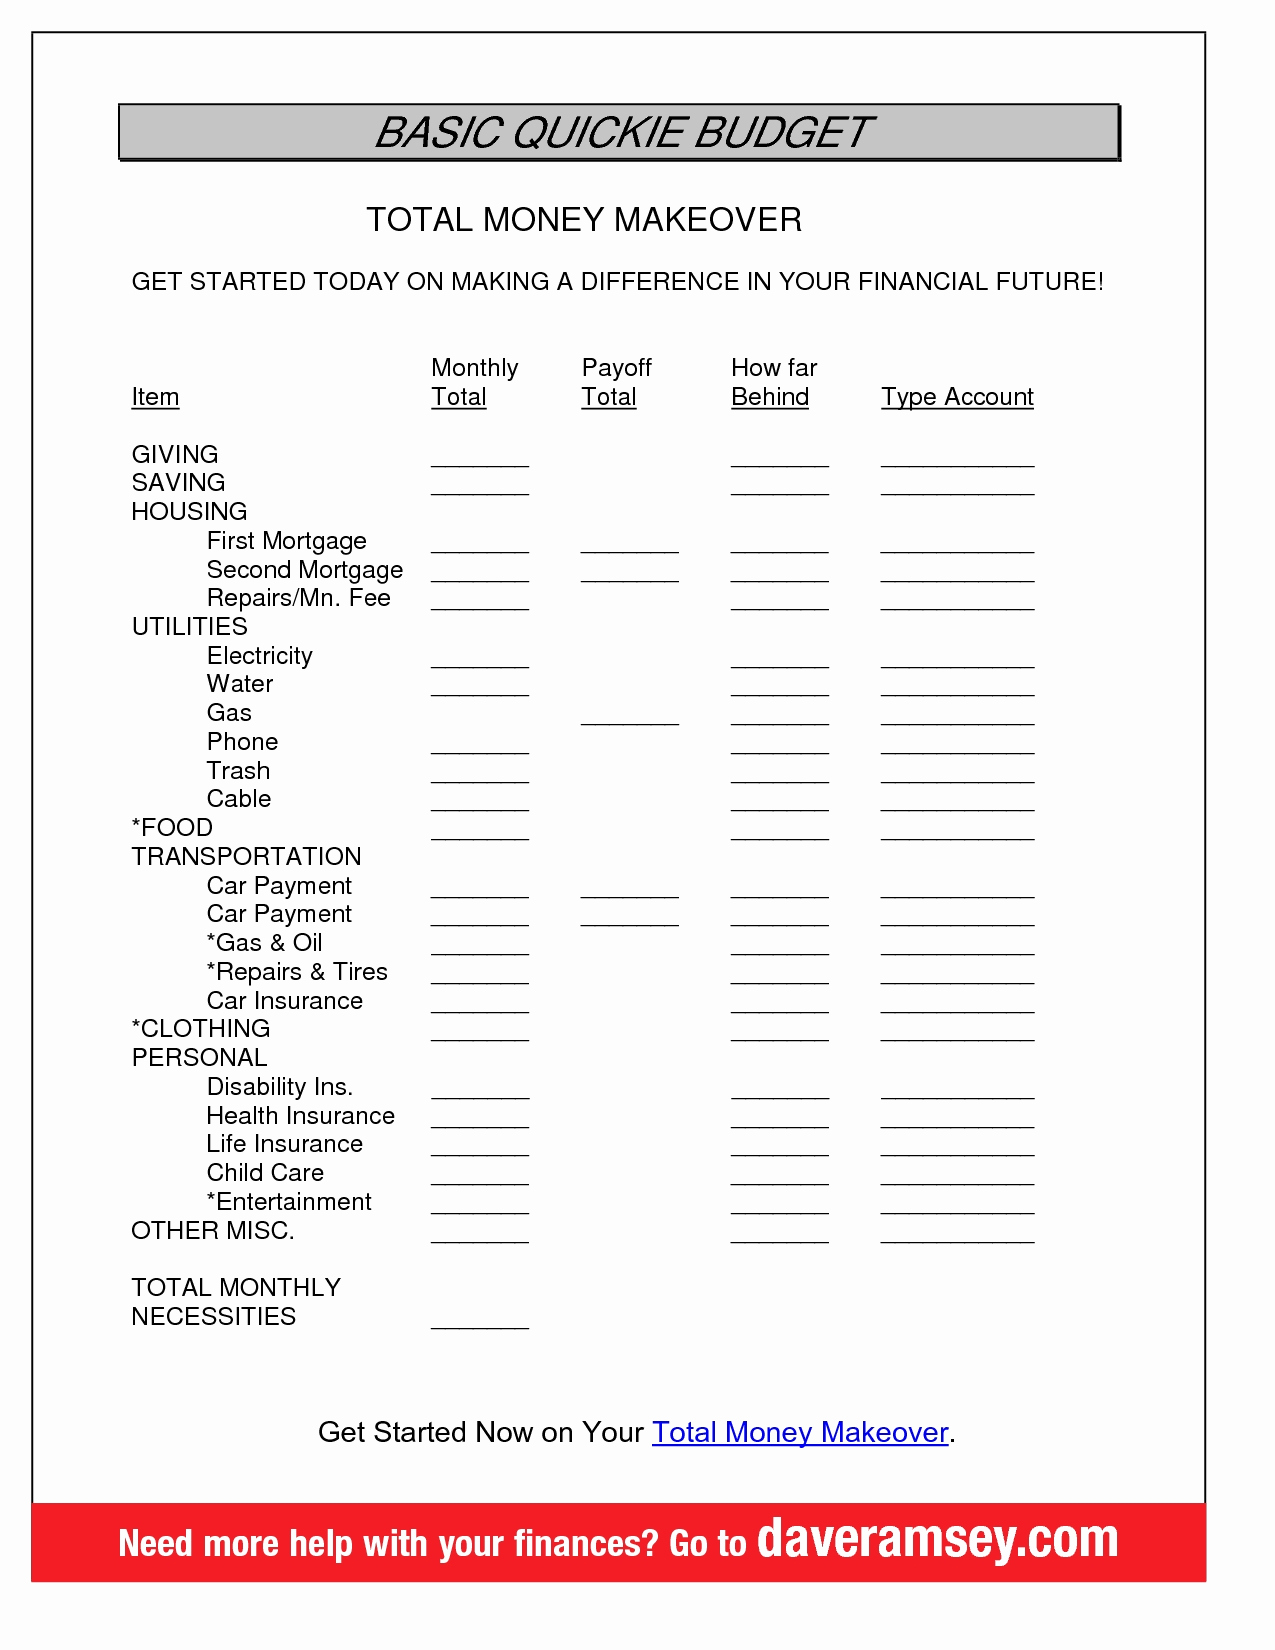 Budget Template Dave Ramsey Awesome Dave Ramsey Spreadsheet Template